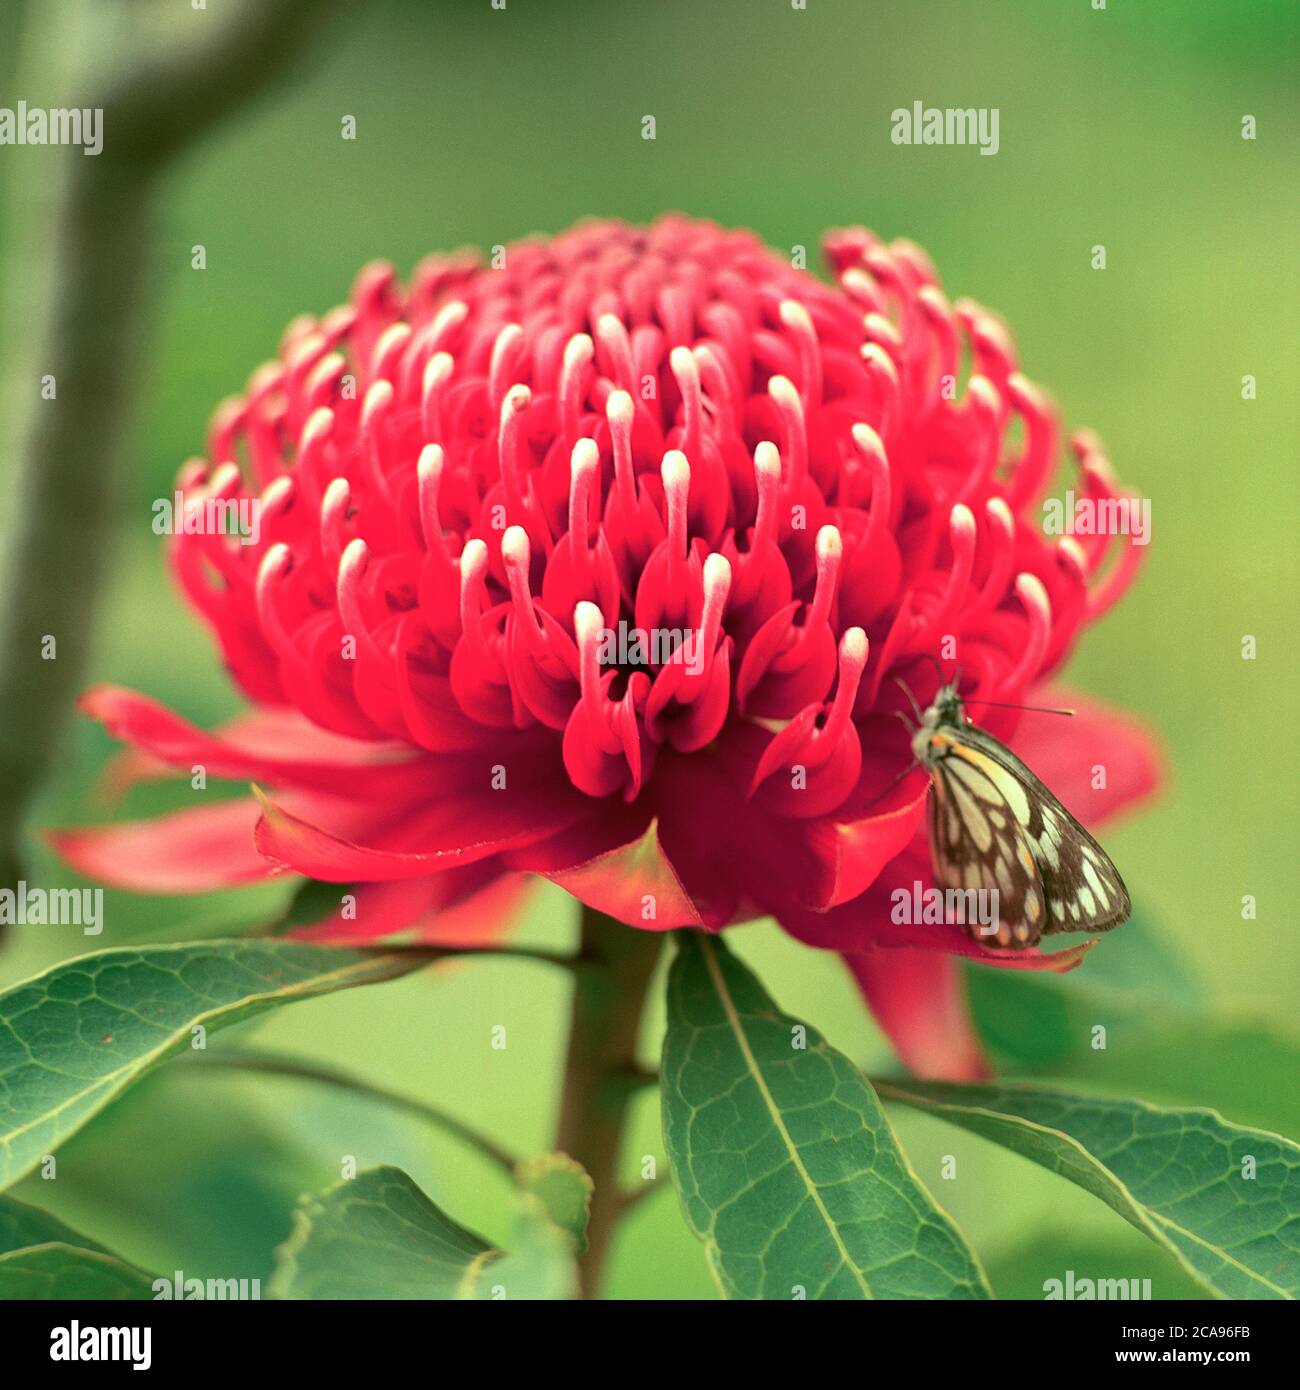 A close up of a Waratah (Telopea speciosissima) plant and butterfly. Stock Photo